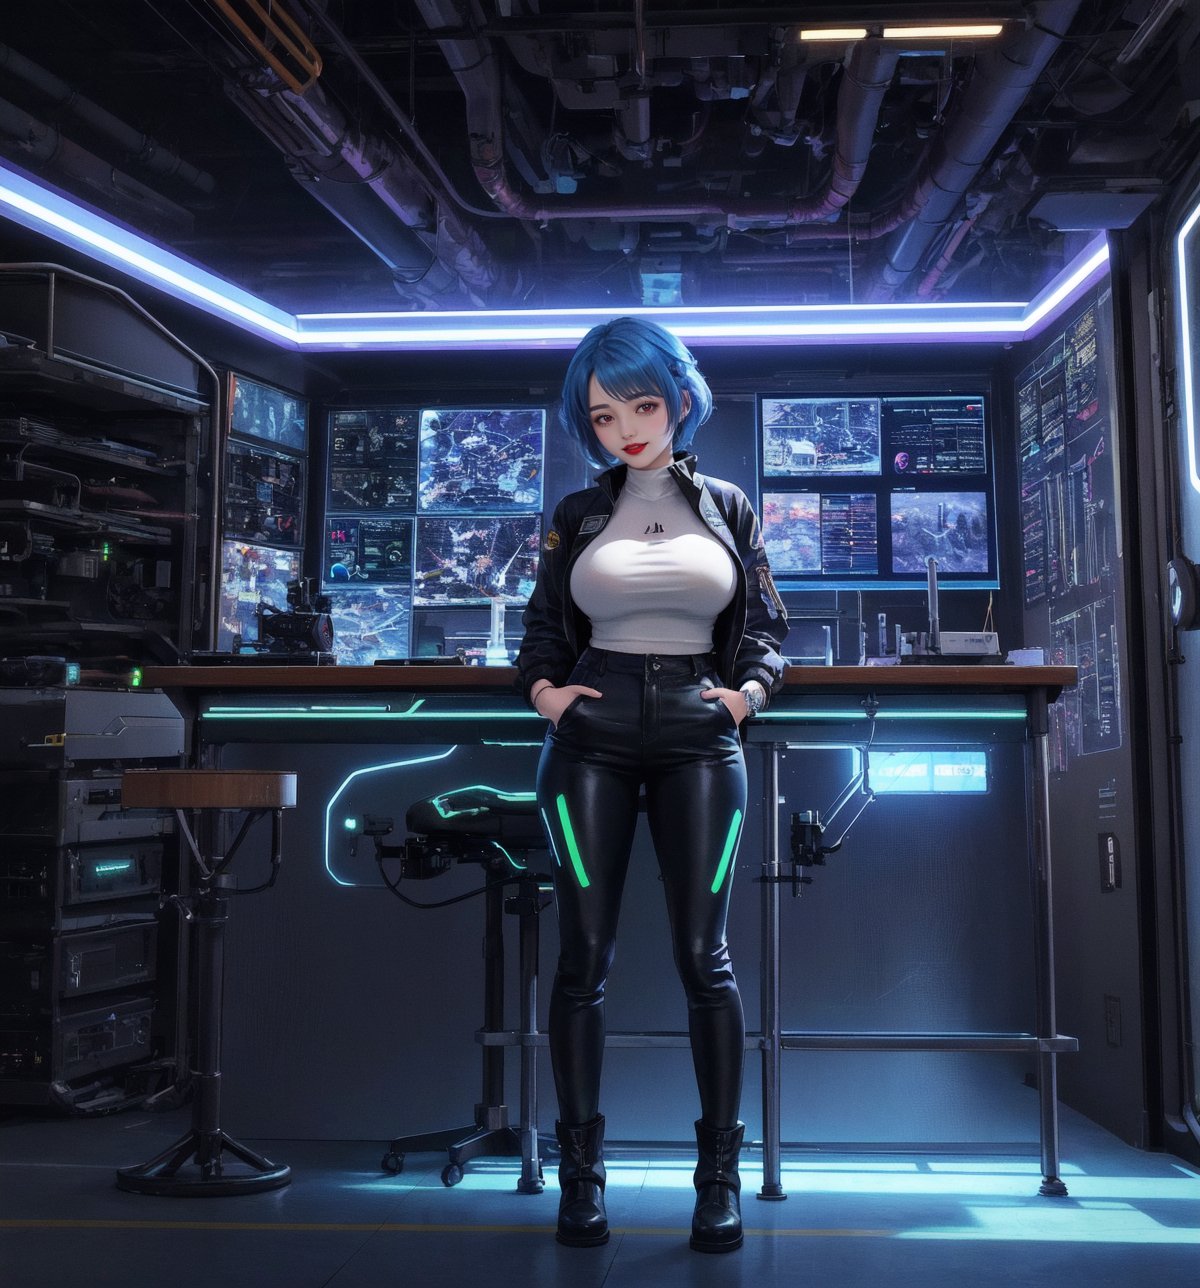 An ultra-detailed 16K masterpiece with sci-fi and adventure stylings, rendered in ultra-high resolution with realistic detail. Maia, a beautiful 23-year-old woman, is dressed as a mecha pilot in a futuristic laboratory. She wears a suit of silver metal armour, a black jacket, black trousers, black boots and black gloves. Her short blue hair is styled in a Mohican cut with gradient effects. She has red eyes, looking at the viewer while smiling, showing her teeth and wearing red lipstick. The image emphasises Maia's imposing figure and the technological elements of the futuristic laboratory. The metal structures, computers, control panels and luminous machines create a cold, sterile environment. The white lights illuminating the scene add clinical detail to the scene. | Cold, metallic lighting effects create a tense, futuristic atmosphere, while detailed textures on the structures and the costume add realism to the image. | A tense, futuristic scene of a beautiful mecha pilot in a futuristic laboratory, fusing elements of sci-fi and adventure. | (((The image reveals a full-body shot as Maia assumes a sensual pose, engagingly leaning against a structure within the scene in an exciting manner. She takes on a sensual pose as she interacts, boldly leaning on a structure, leaning back and boldly throwing herself onto the structure, reclining back in an exhilarating way.))). | ((((full-body shot)))), ((perfect pose)), ((perfect limbs, perfect fingers, better hands, perfect hands, hands)), ((perfect legs, perfect feet)), ((huge breasts)), ((perfect design)), ((perfect composition)), ((very detailed scene, very detailed background, perfect layout, correct imperfections)), Enhance, Ultra details++, More Detail, poakl